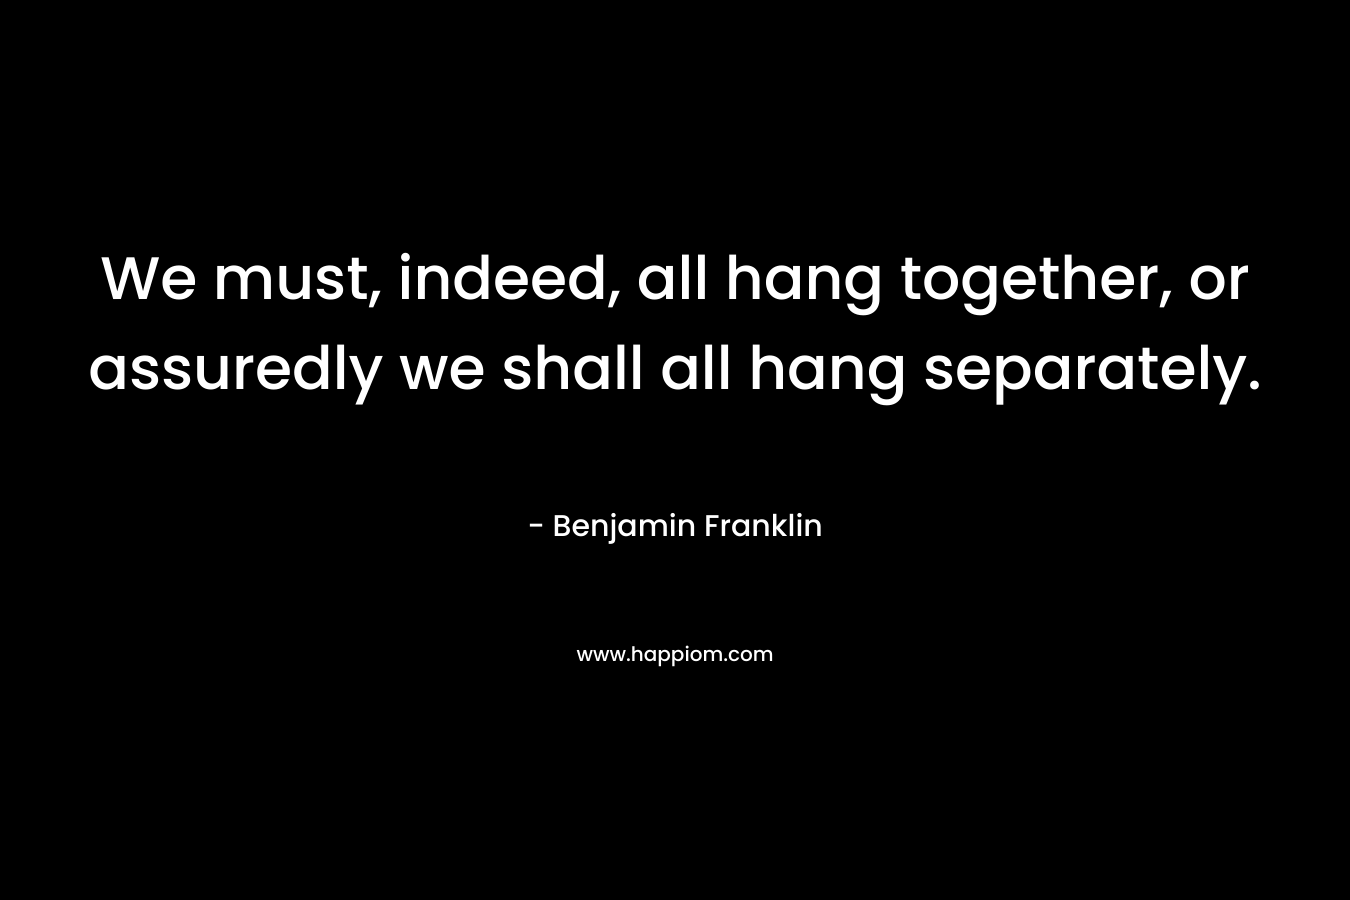 We must, indeed, all hang together, or assuredly we shall all hang separately. – Benjamin Franklin